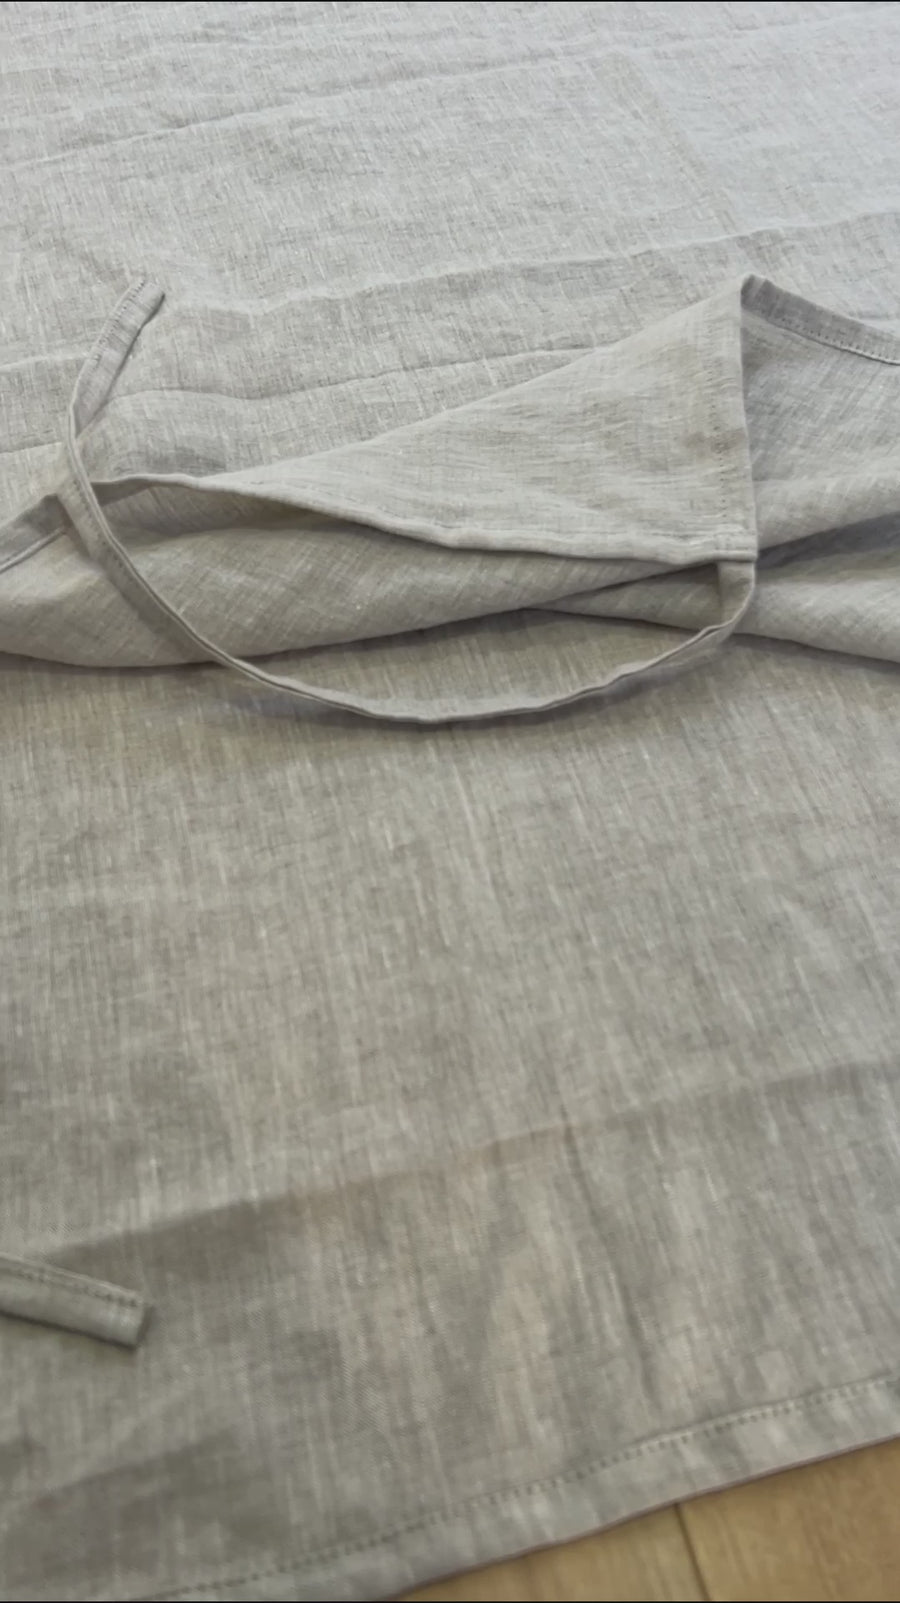 Linen Single Sleeping Bag Liner for Camping Hiking Hostel Travel non-dyed linen fabric custom made